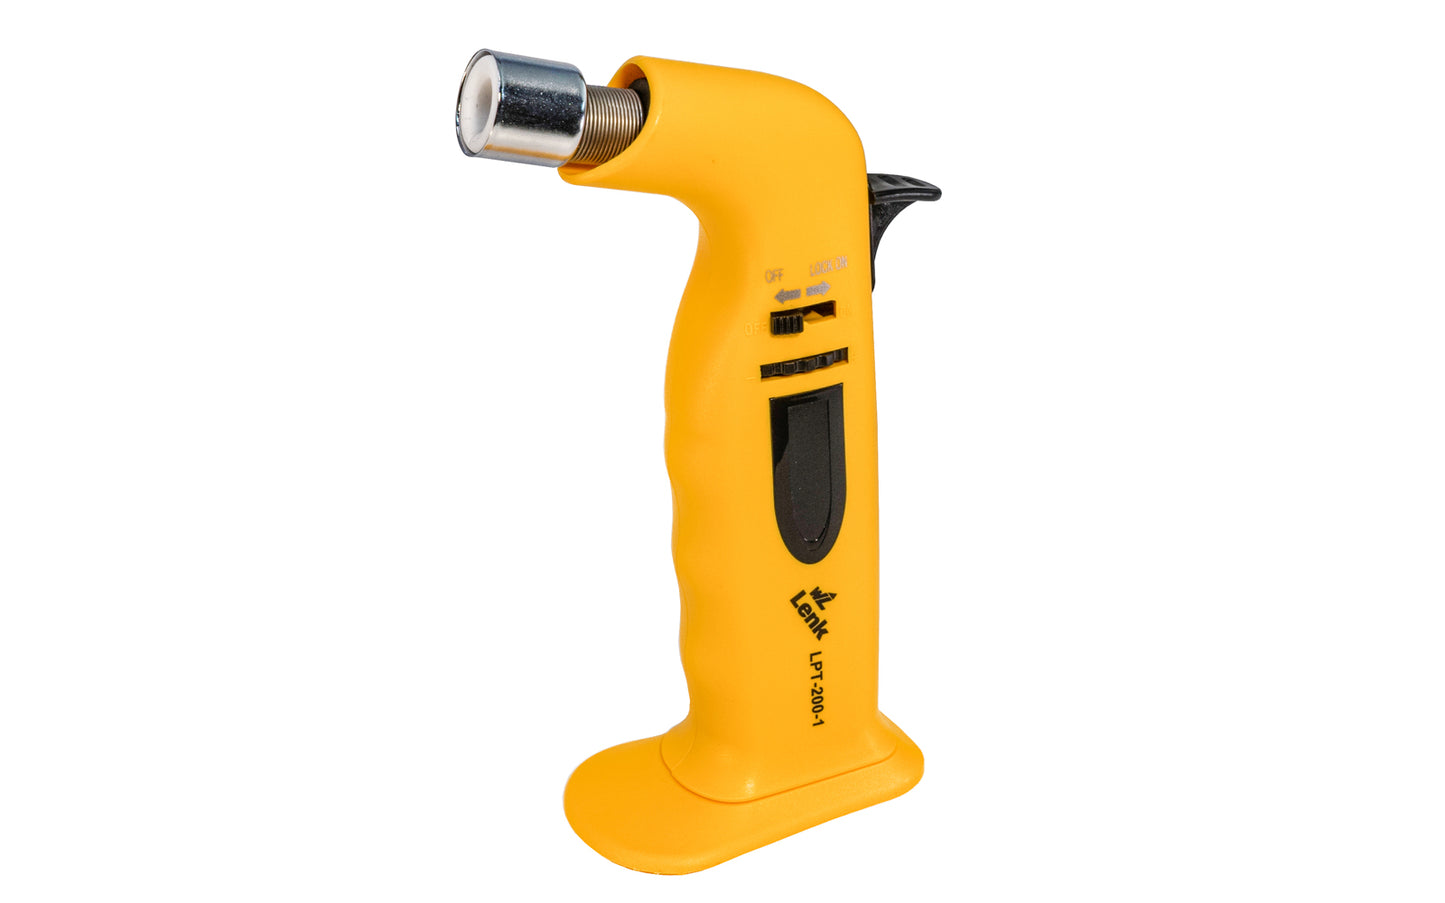 The Wall Lenk LPT-200-1 Portable Professional Torch features an adjustable high output flame. Use blow torch for industrial maintenance, tool & die shop work, automotive work, electronic repairs, lab work, brazing, soldering, plumbing, hobby & craftwork, chef's torch, etc.  Flame temperature - 2400° F - Blue flame - 048491400022